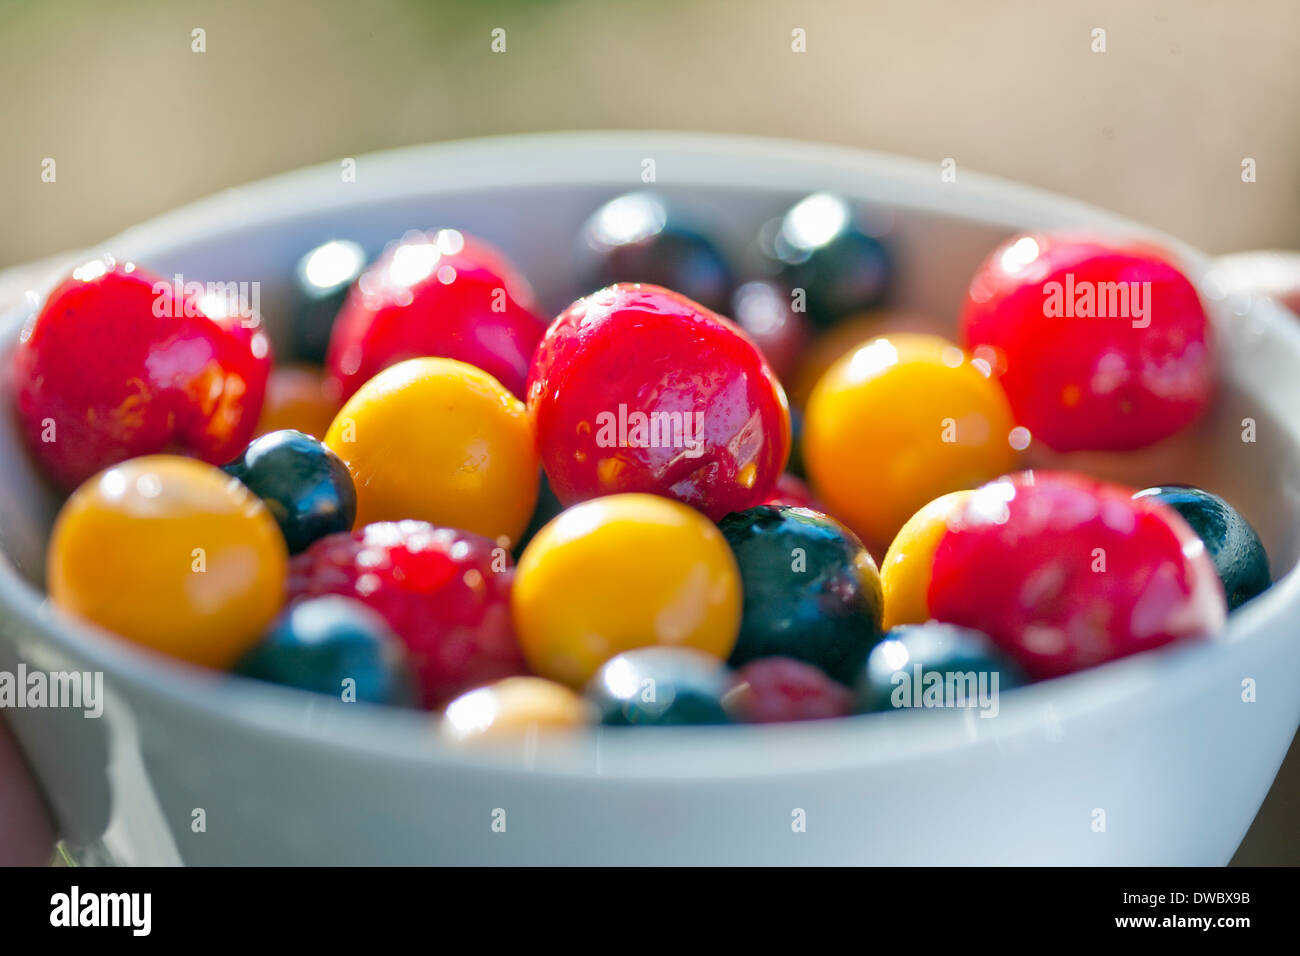 Bowl of mixed berries Stock Photo